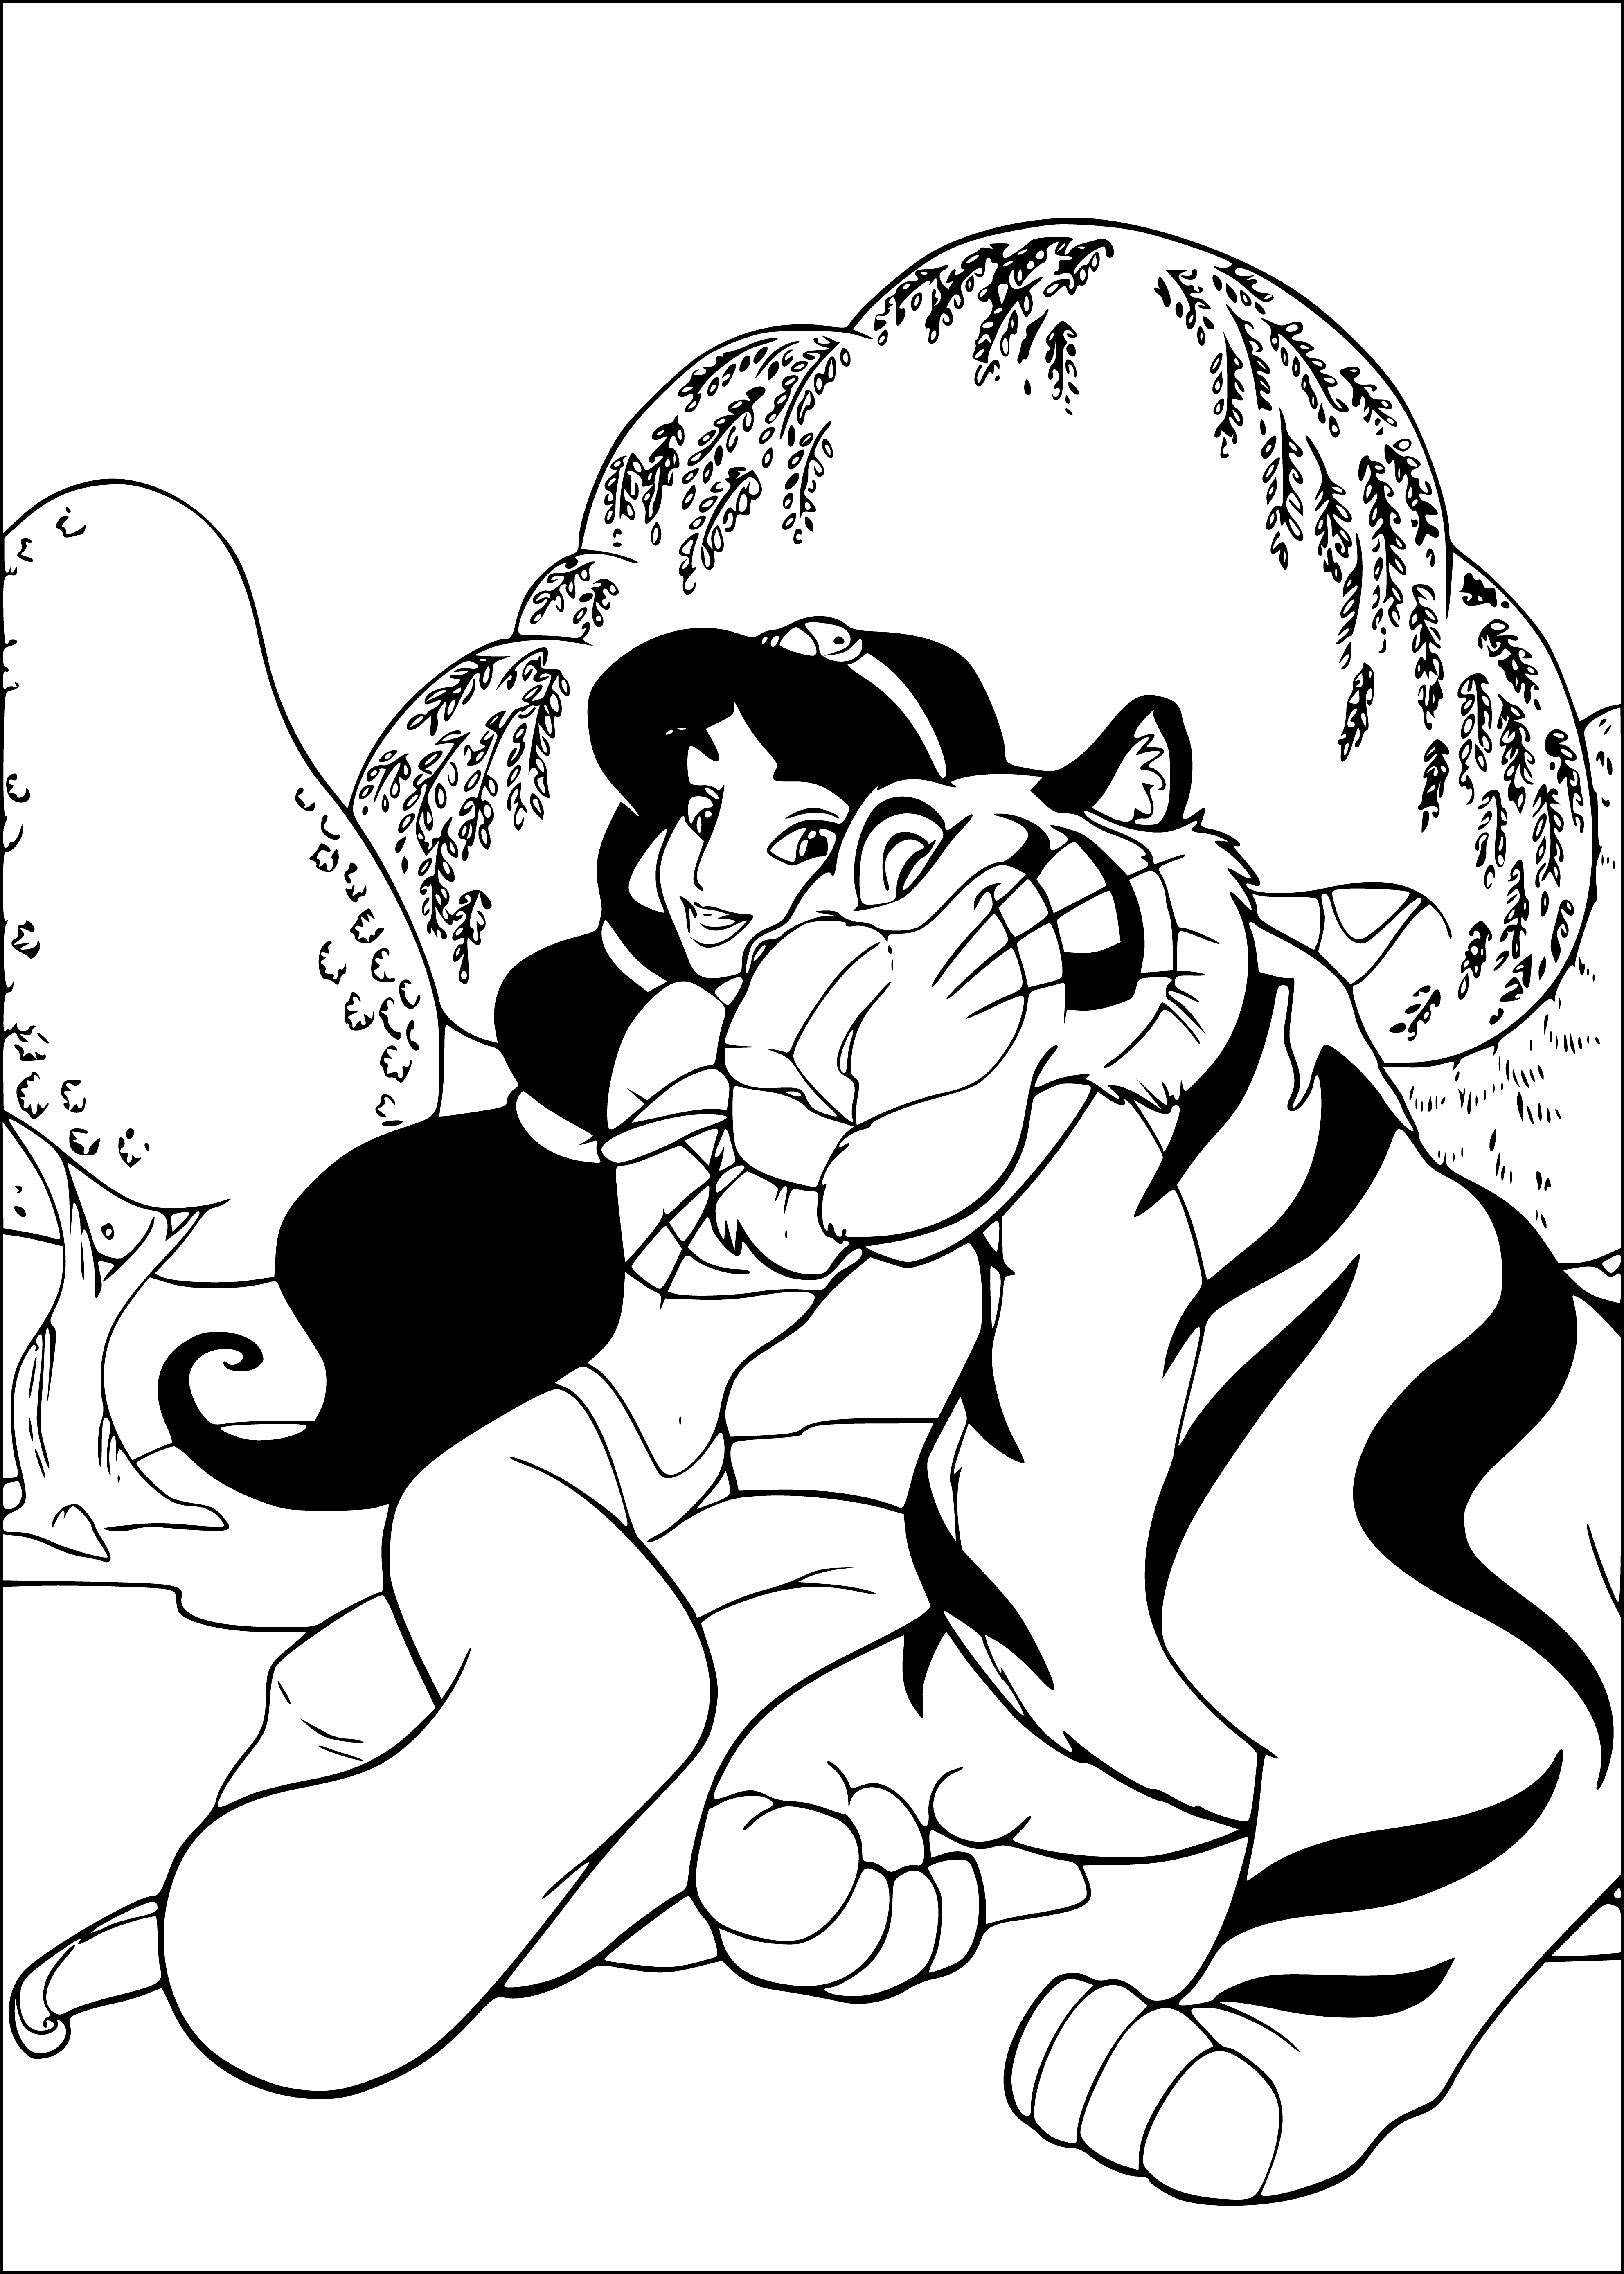 coloring page: Aladdin and Jasmine fly on a magic carpet, accompanied by a tiger, looking scared over a city.